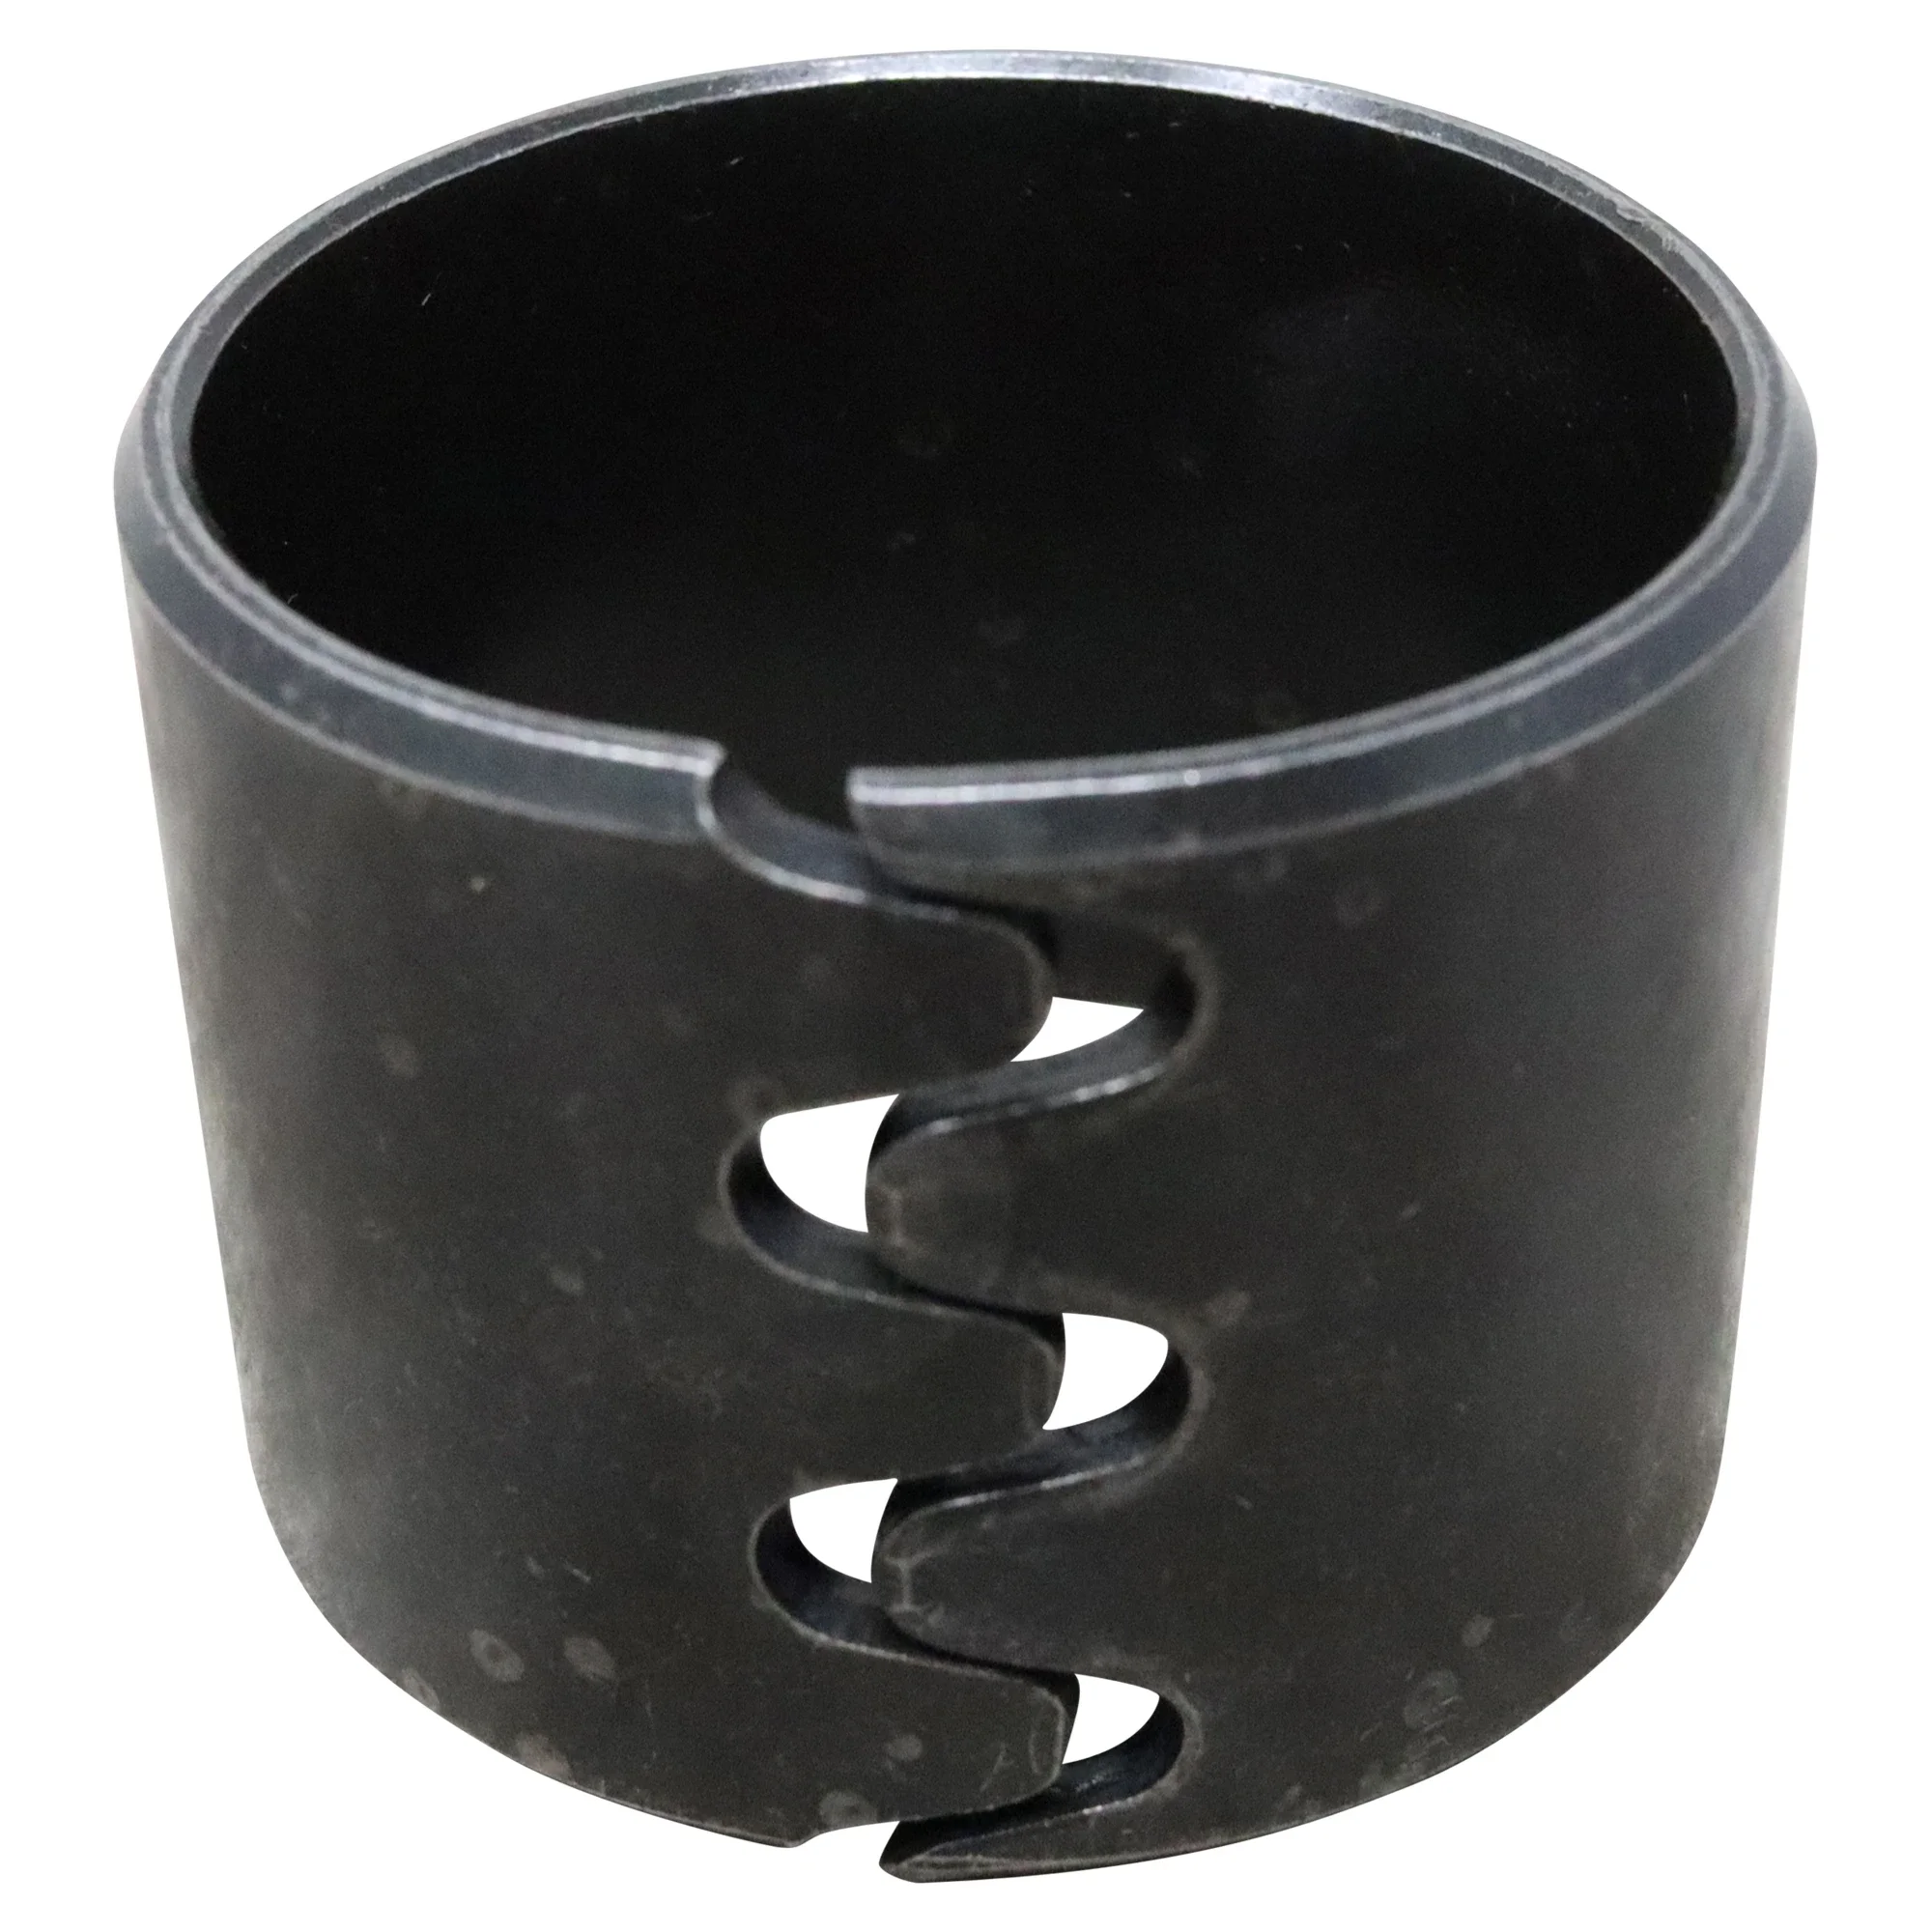 Wastebuilt® Replacement for McNeilus Bushing, Connector 2-1/4" Outer Diameter x 2" Inner Diameter x 1-3/4" Length